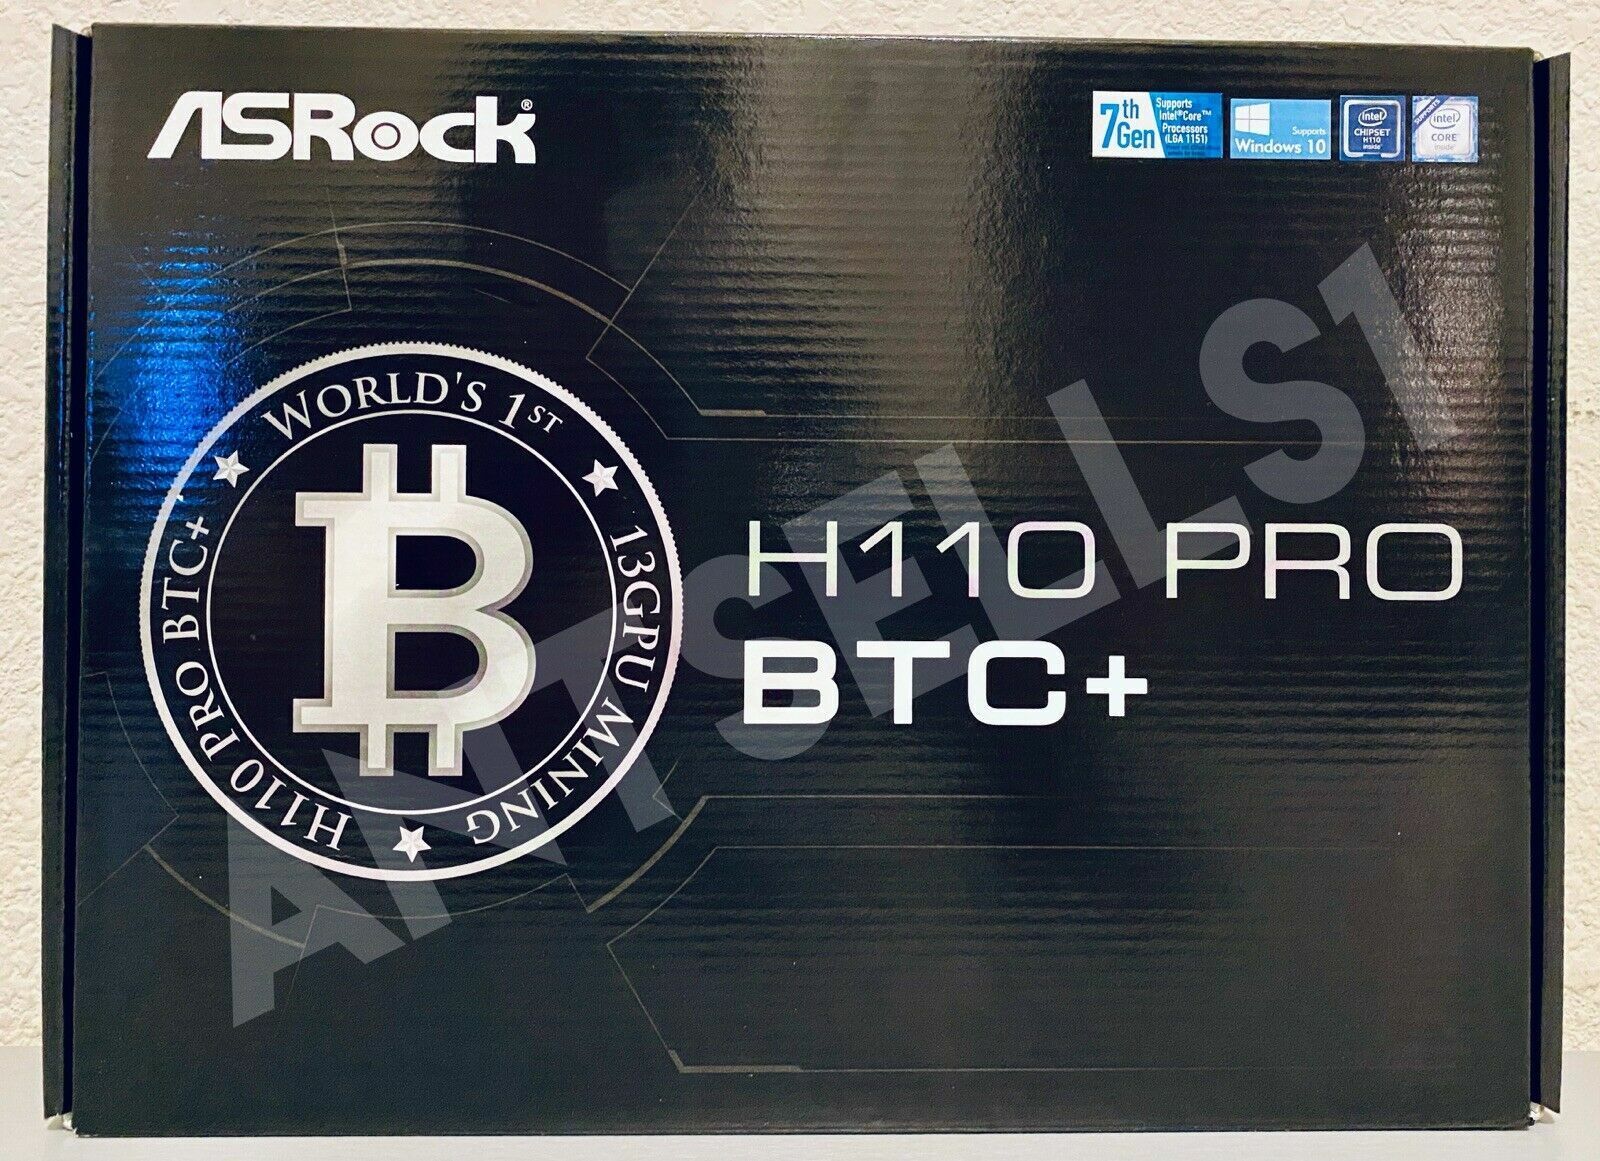 NEW ASRock H110 Pro BTC+ ATX Cryptocurrency Mining Motherboard - SHIPS NOW🚚💨